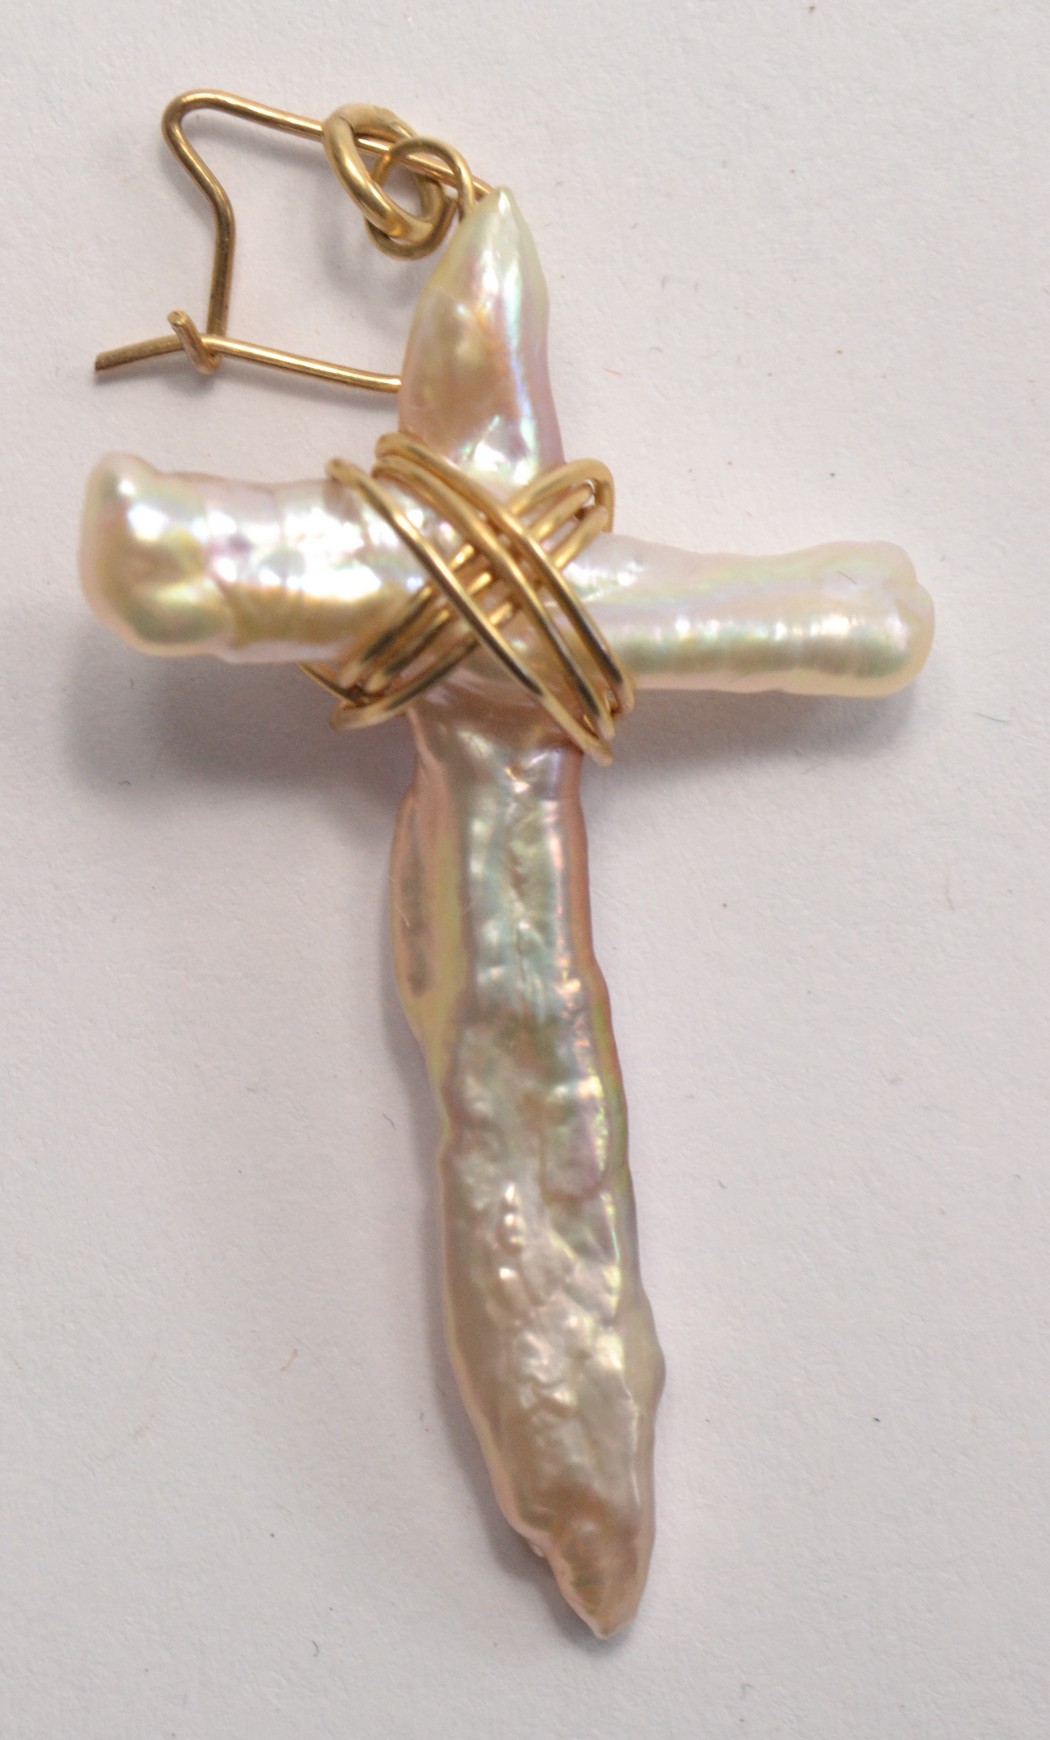 Vintage Gold and pearl crucifix pendant - Image 2 of 6